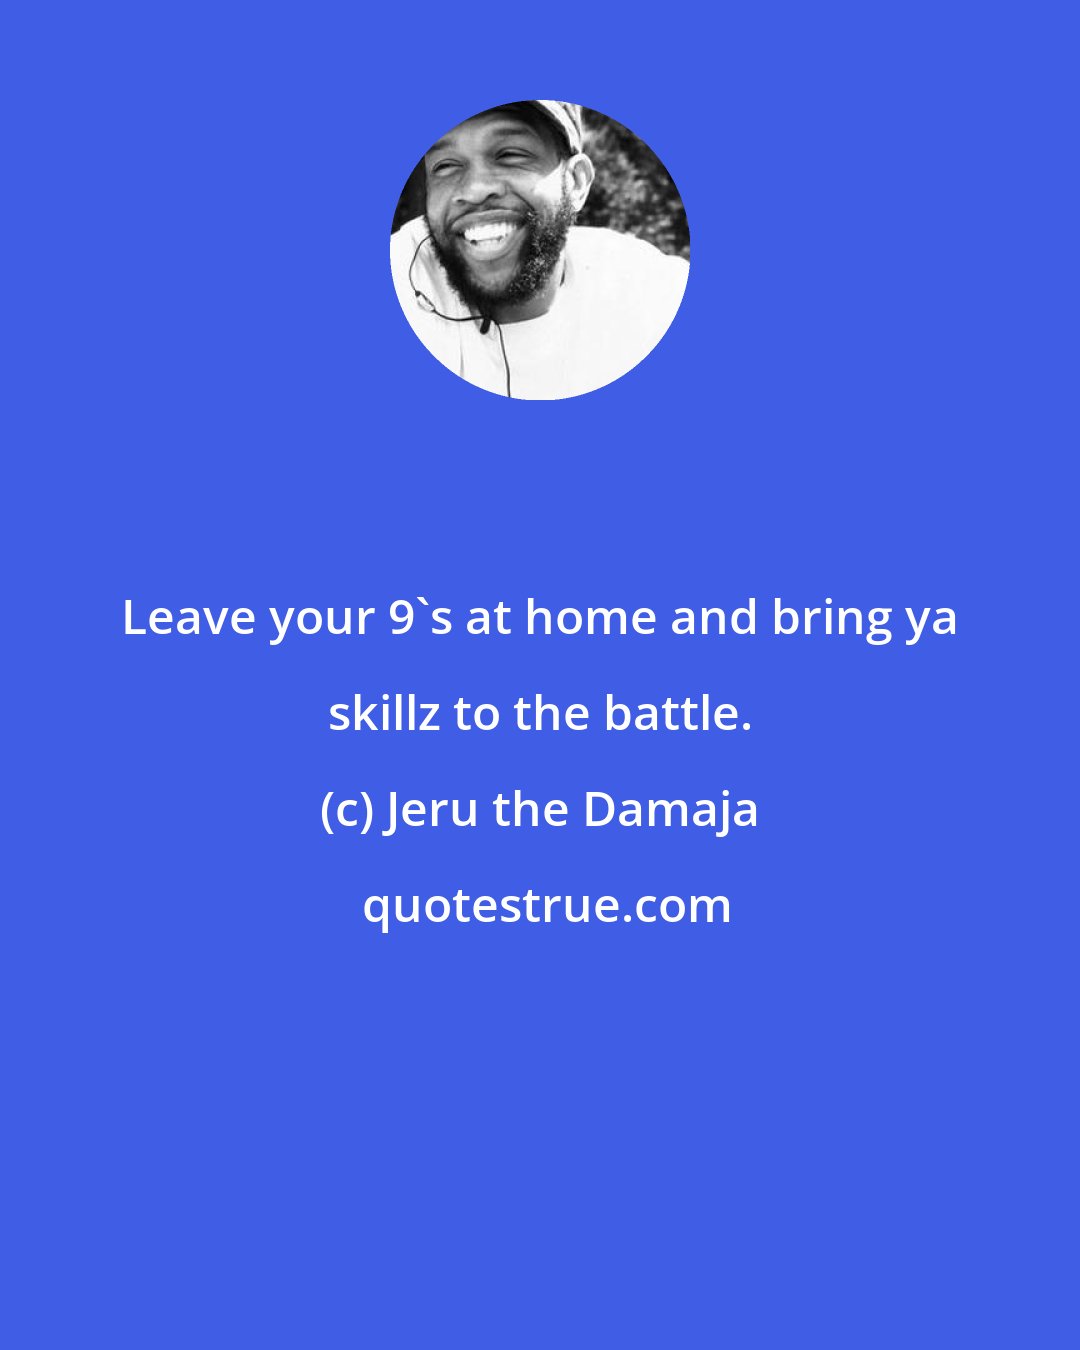 Jeru the Damaja: Leave your 9's at home and bring ya skillz to the battle.